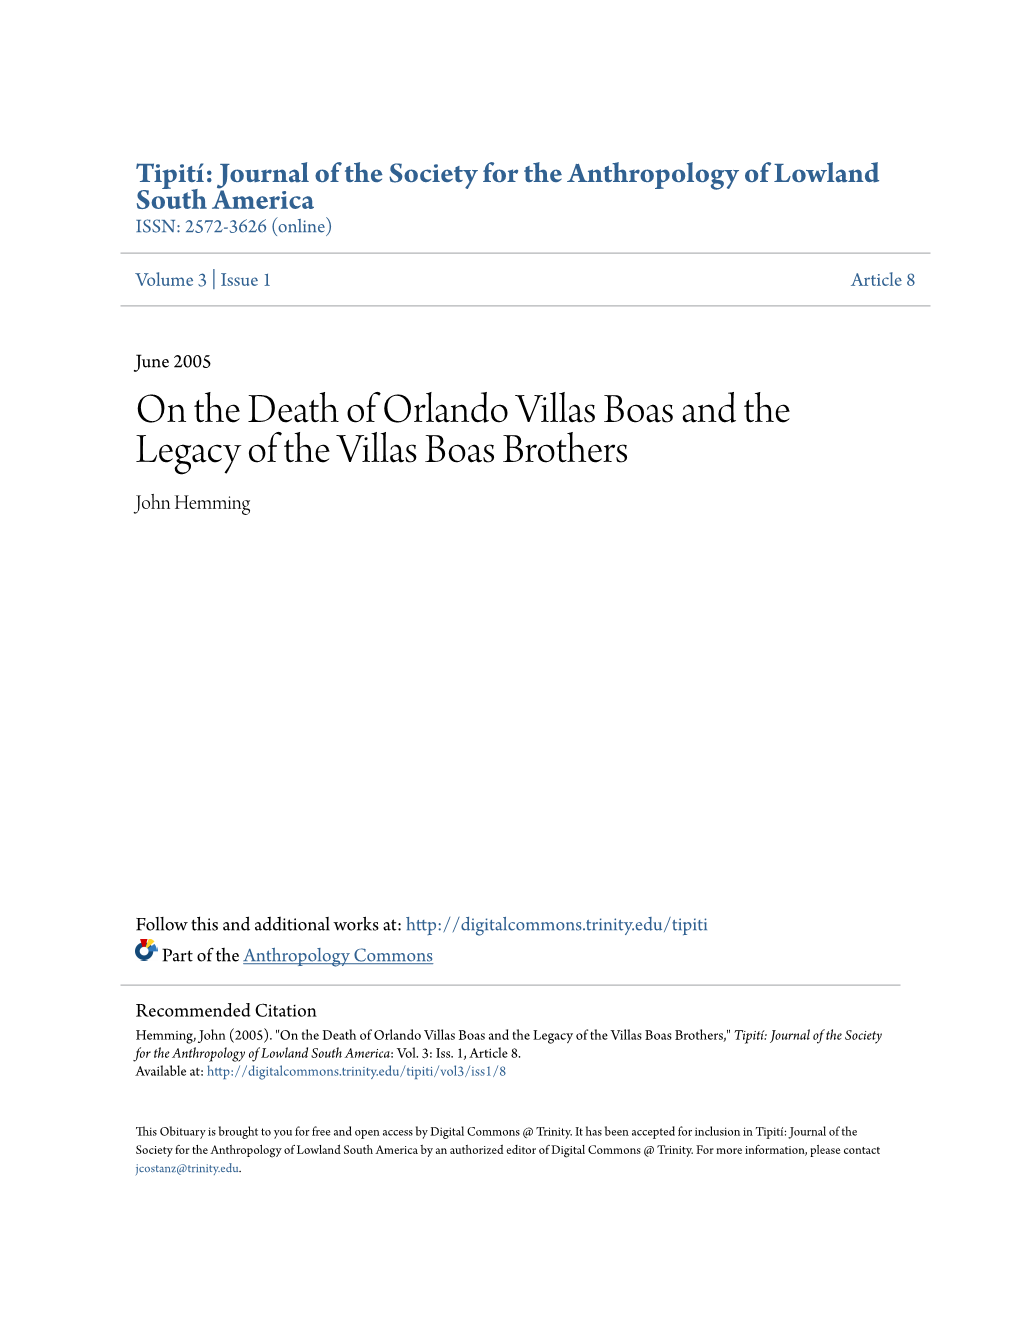 On the Death of Orlando Villas Boas and the Legacy of the Villas Boas Brothers John Hemming